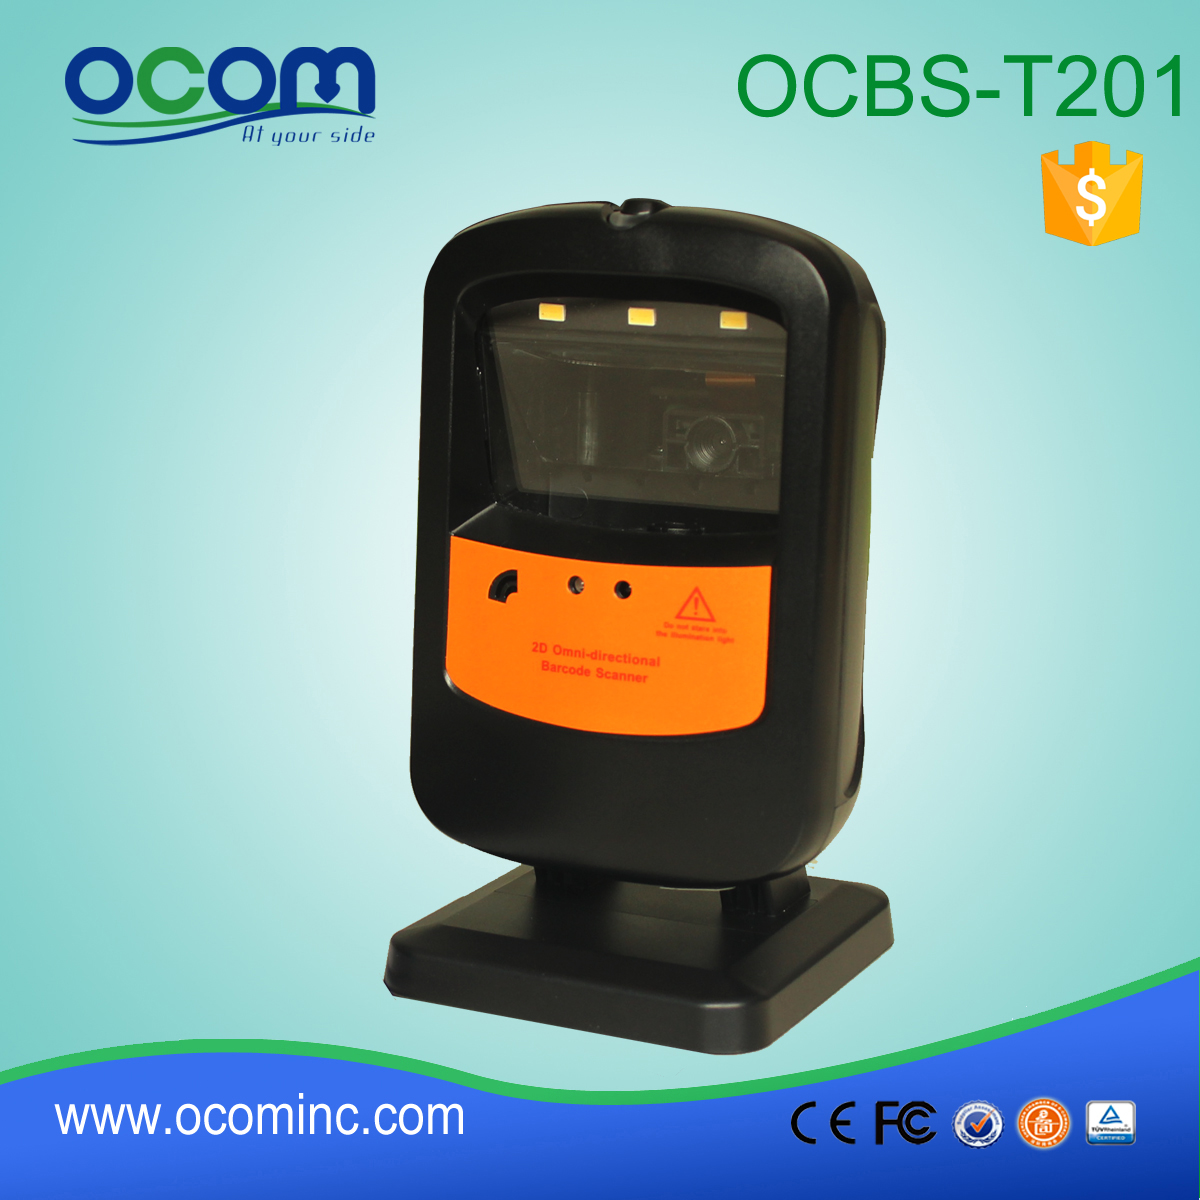 OCB-T201: china barcode scanner RS232, barcode scanner a buon mercato